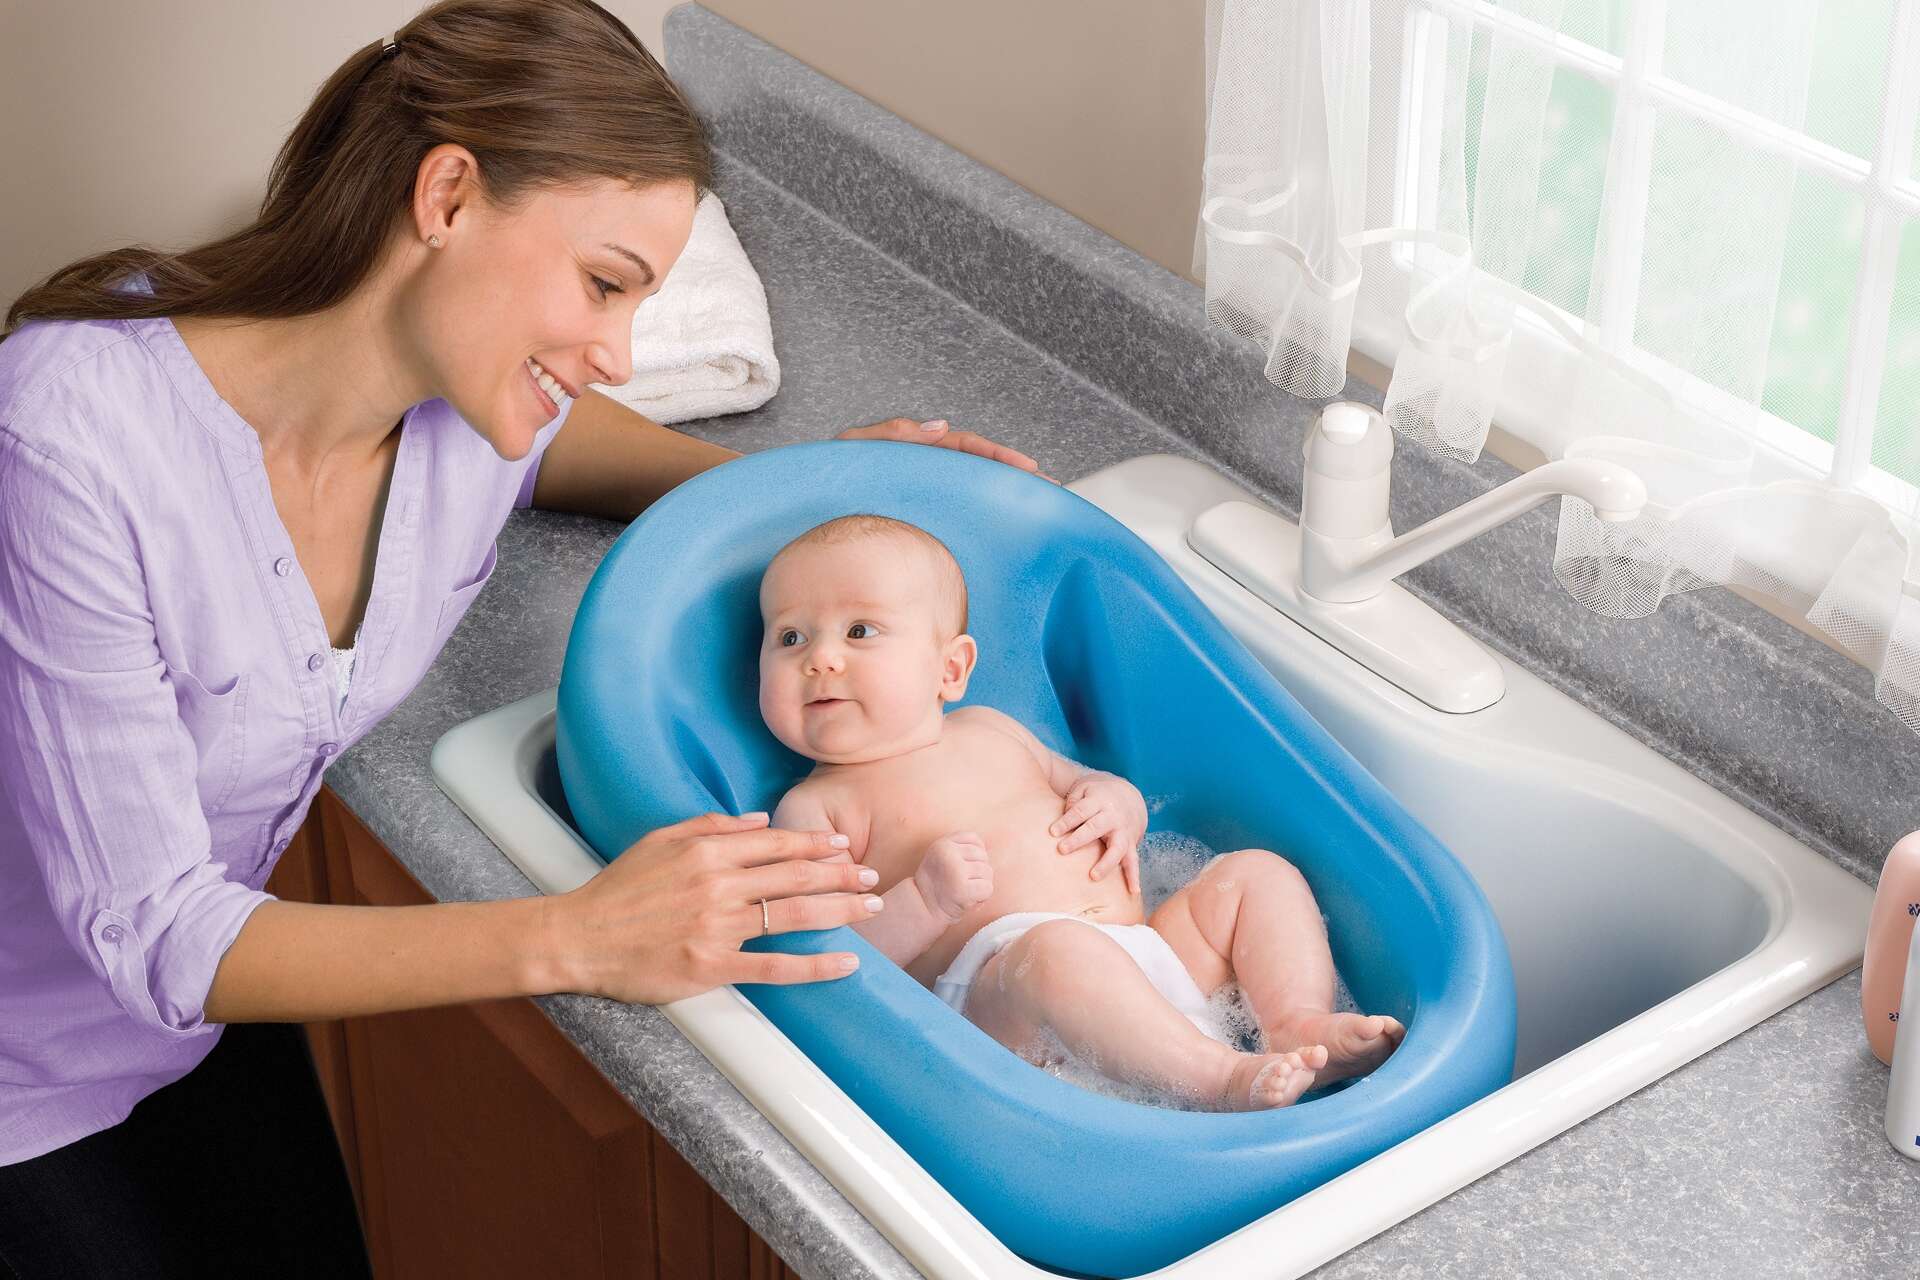 How To Bathe A Baby In The Sink